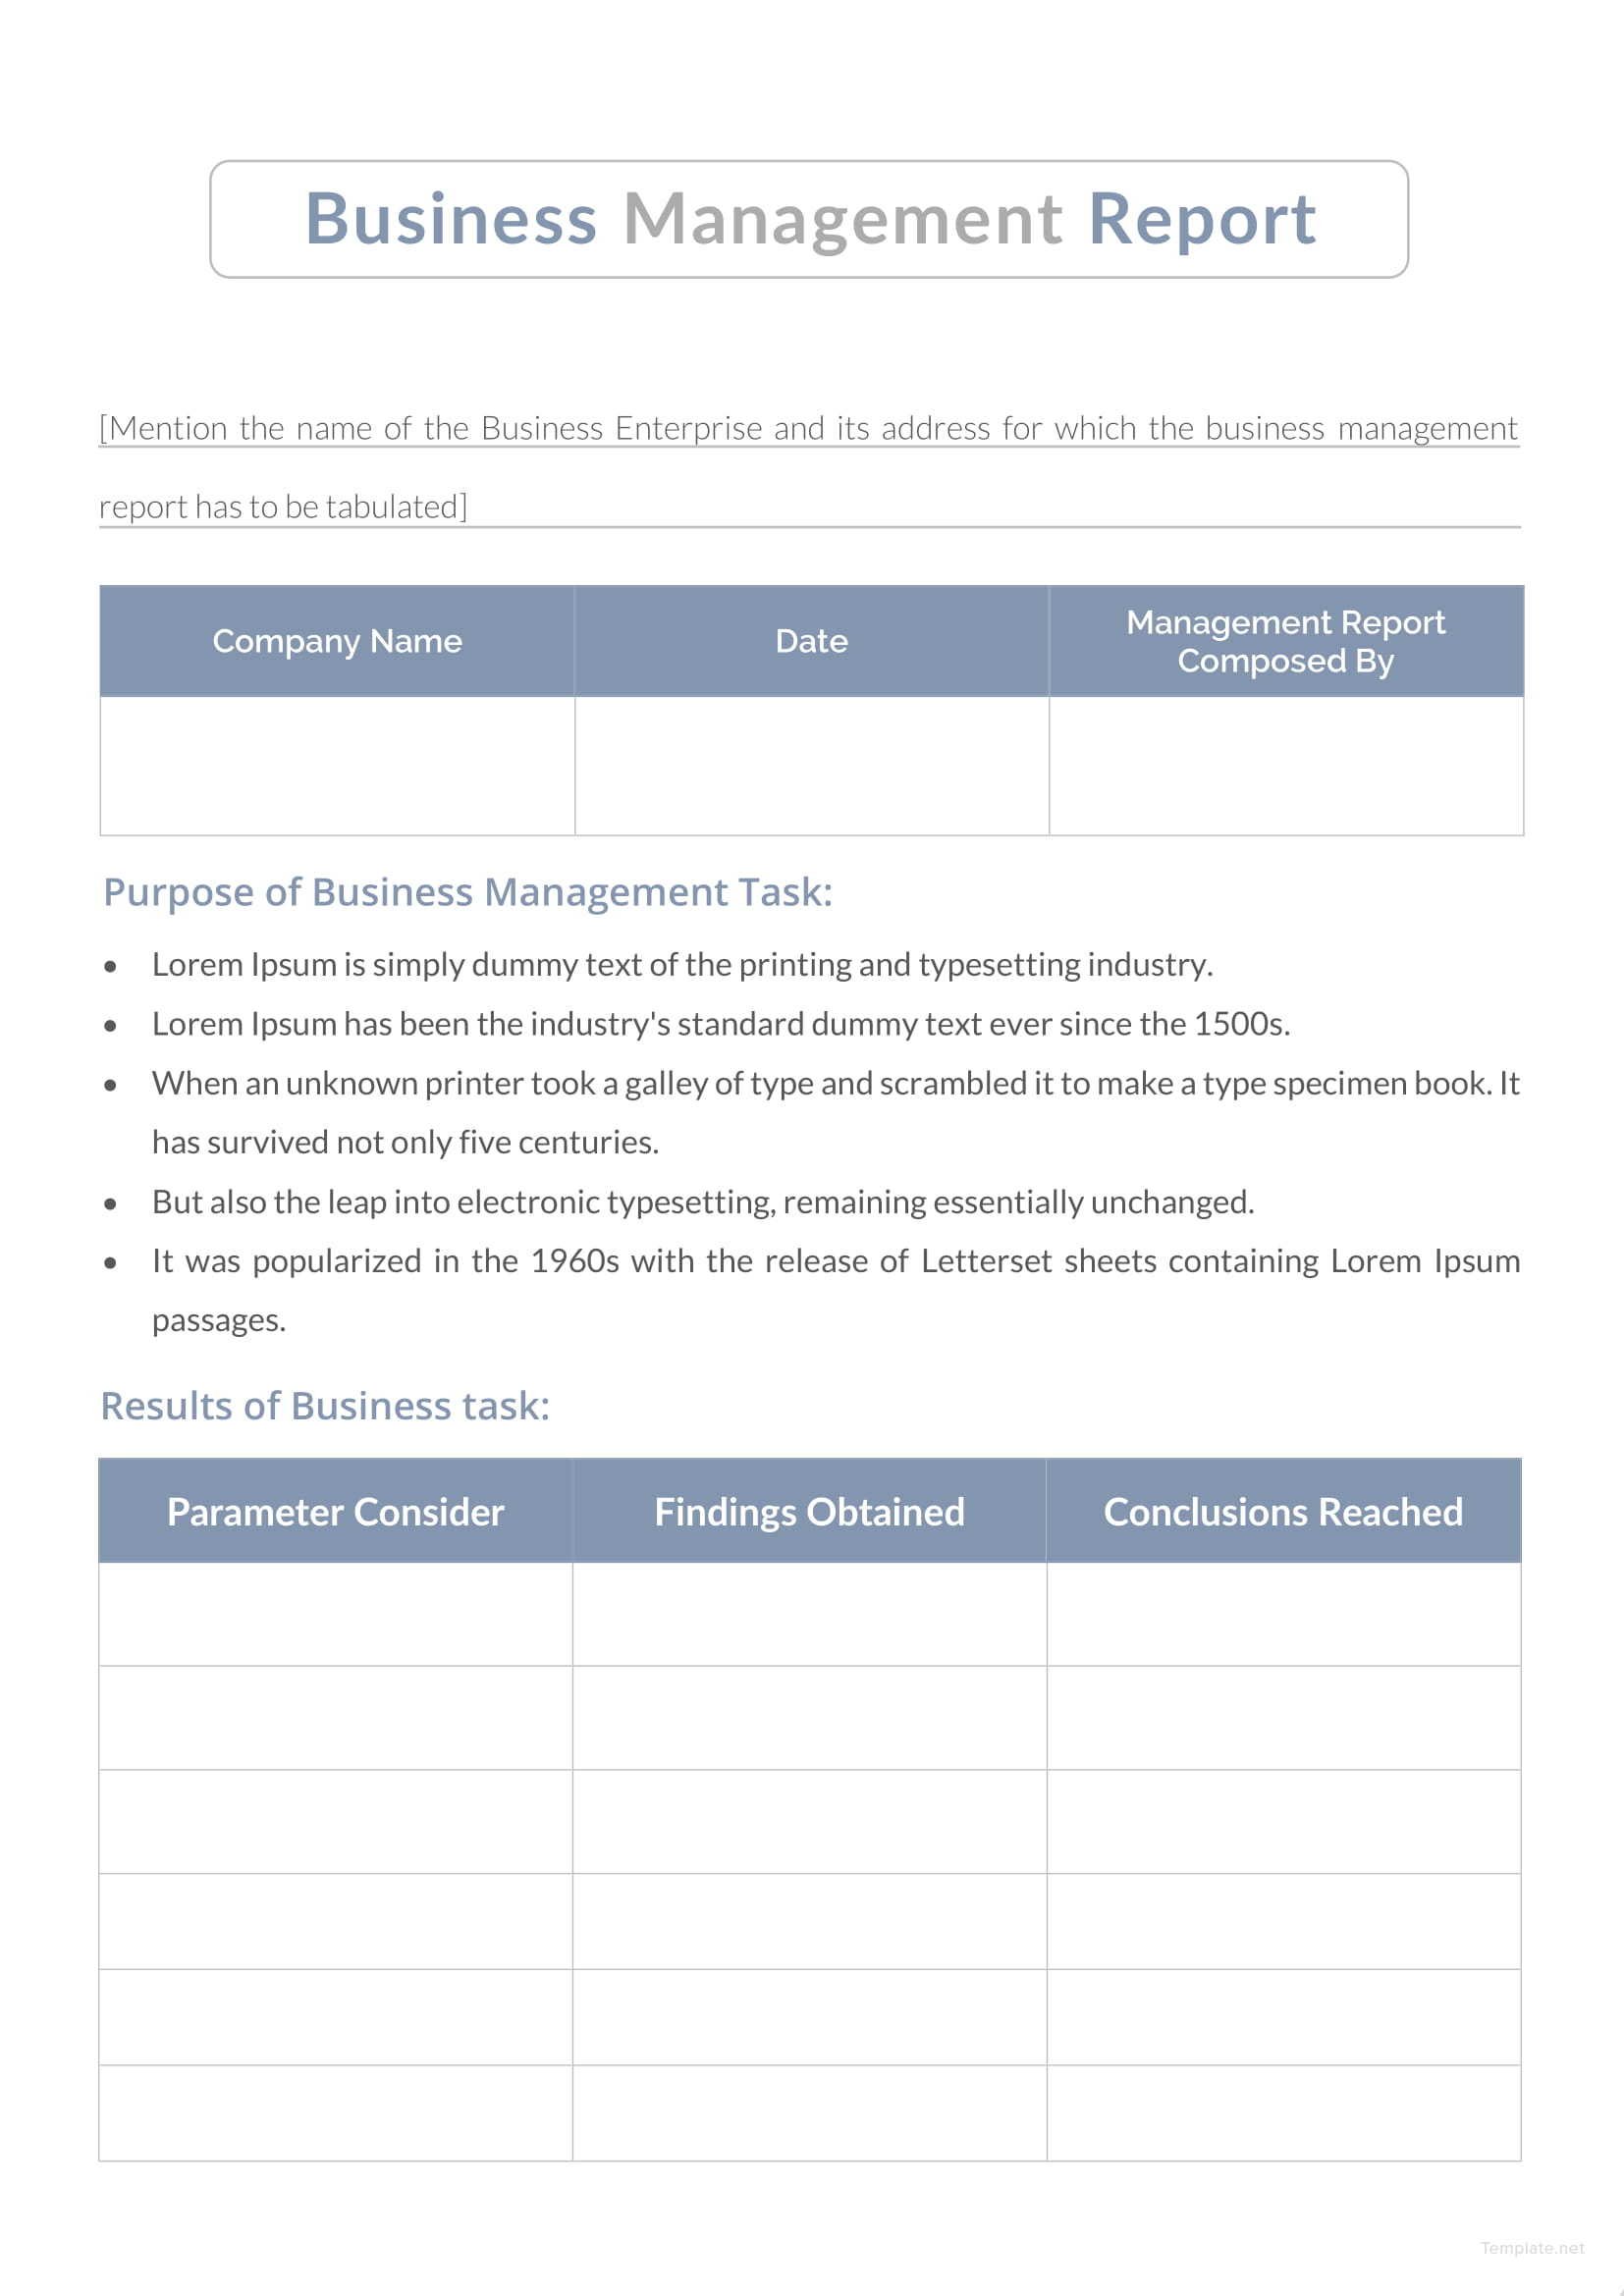 Business Management Report Template in Microsoft Word